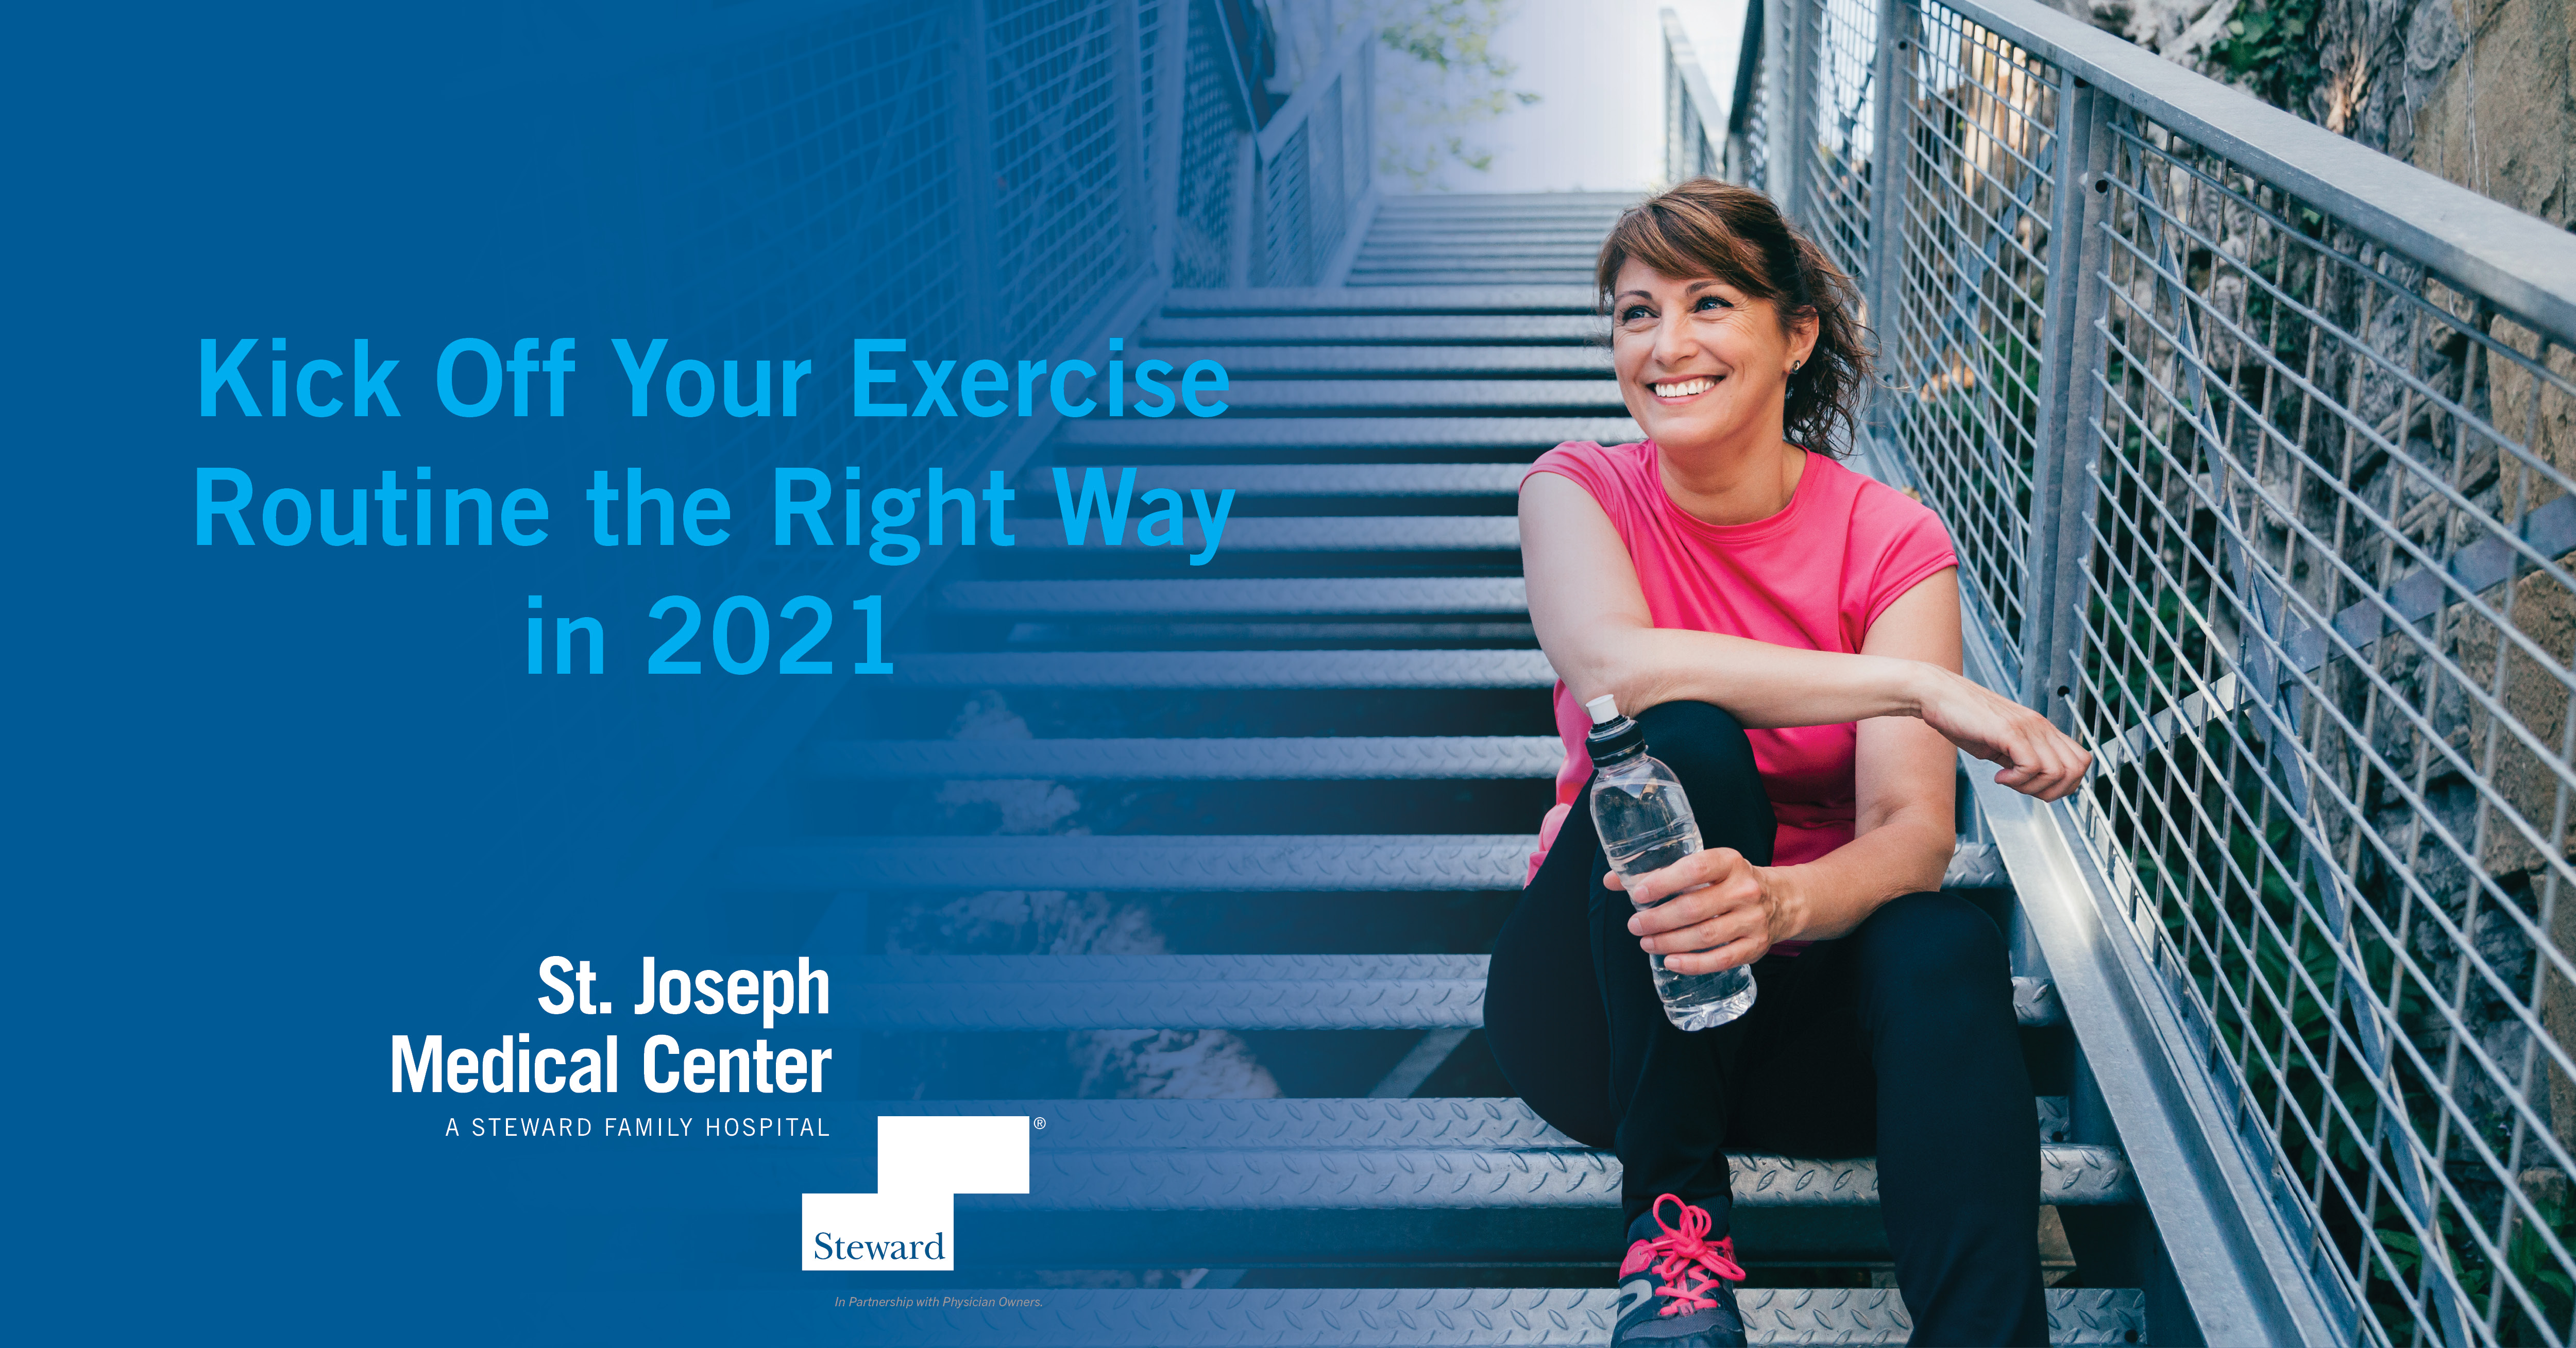 Kick Off Your Exercise Routine the Right Way in 2021